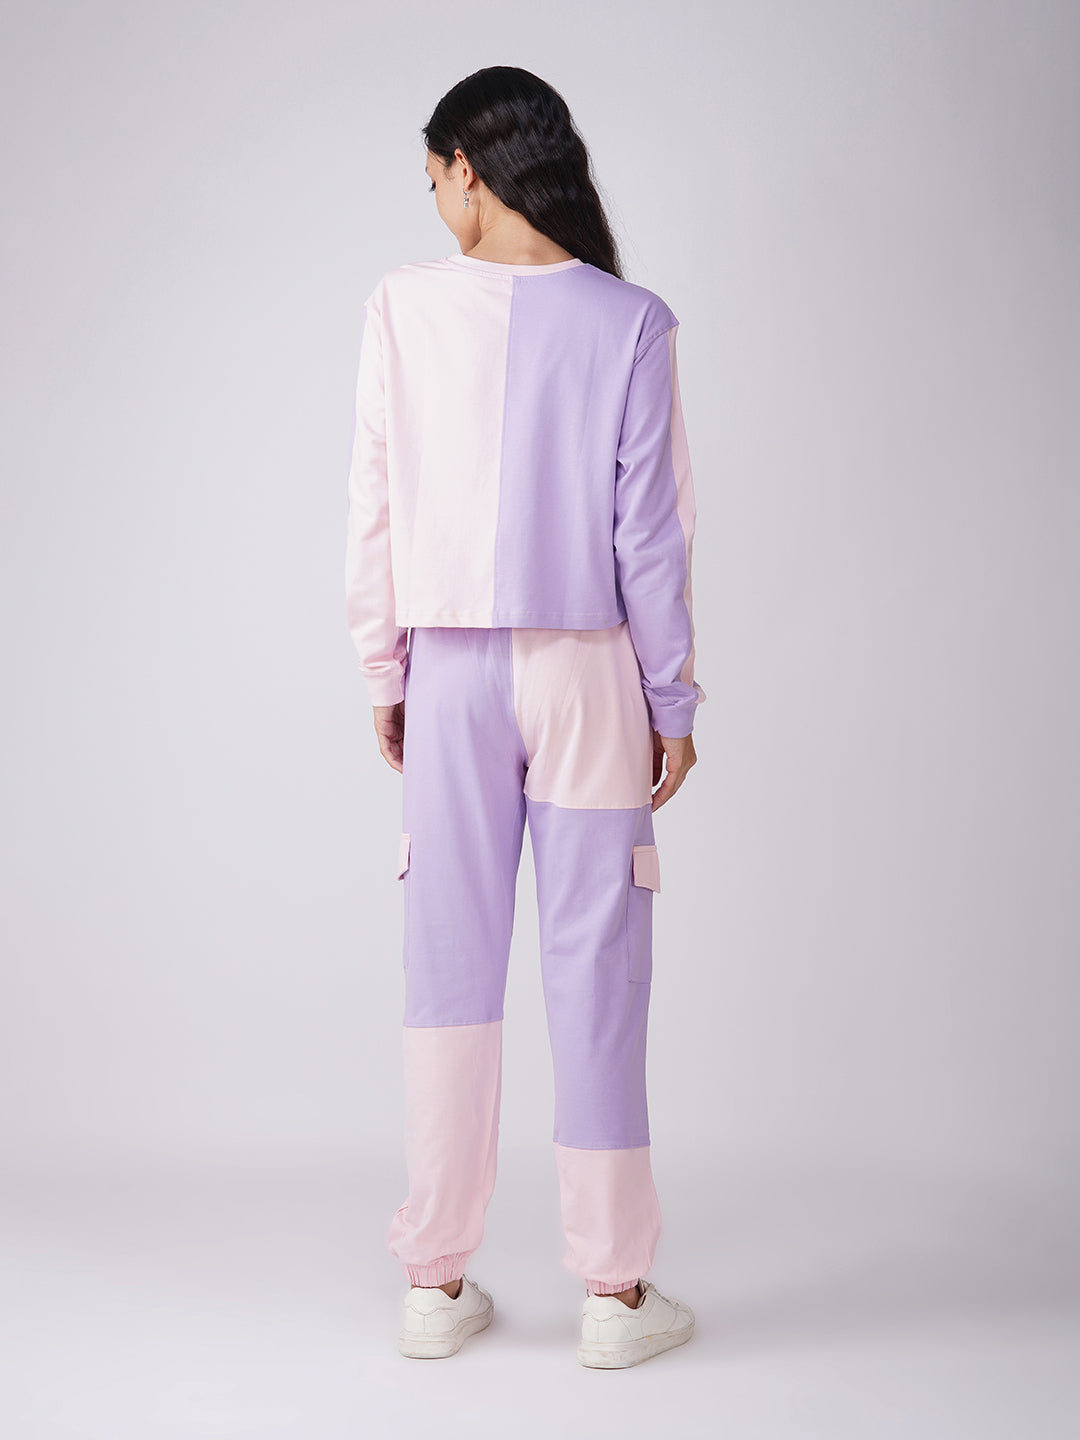 Women's Lilac with Pastel Pink Coords